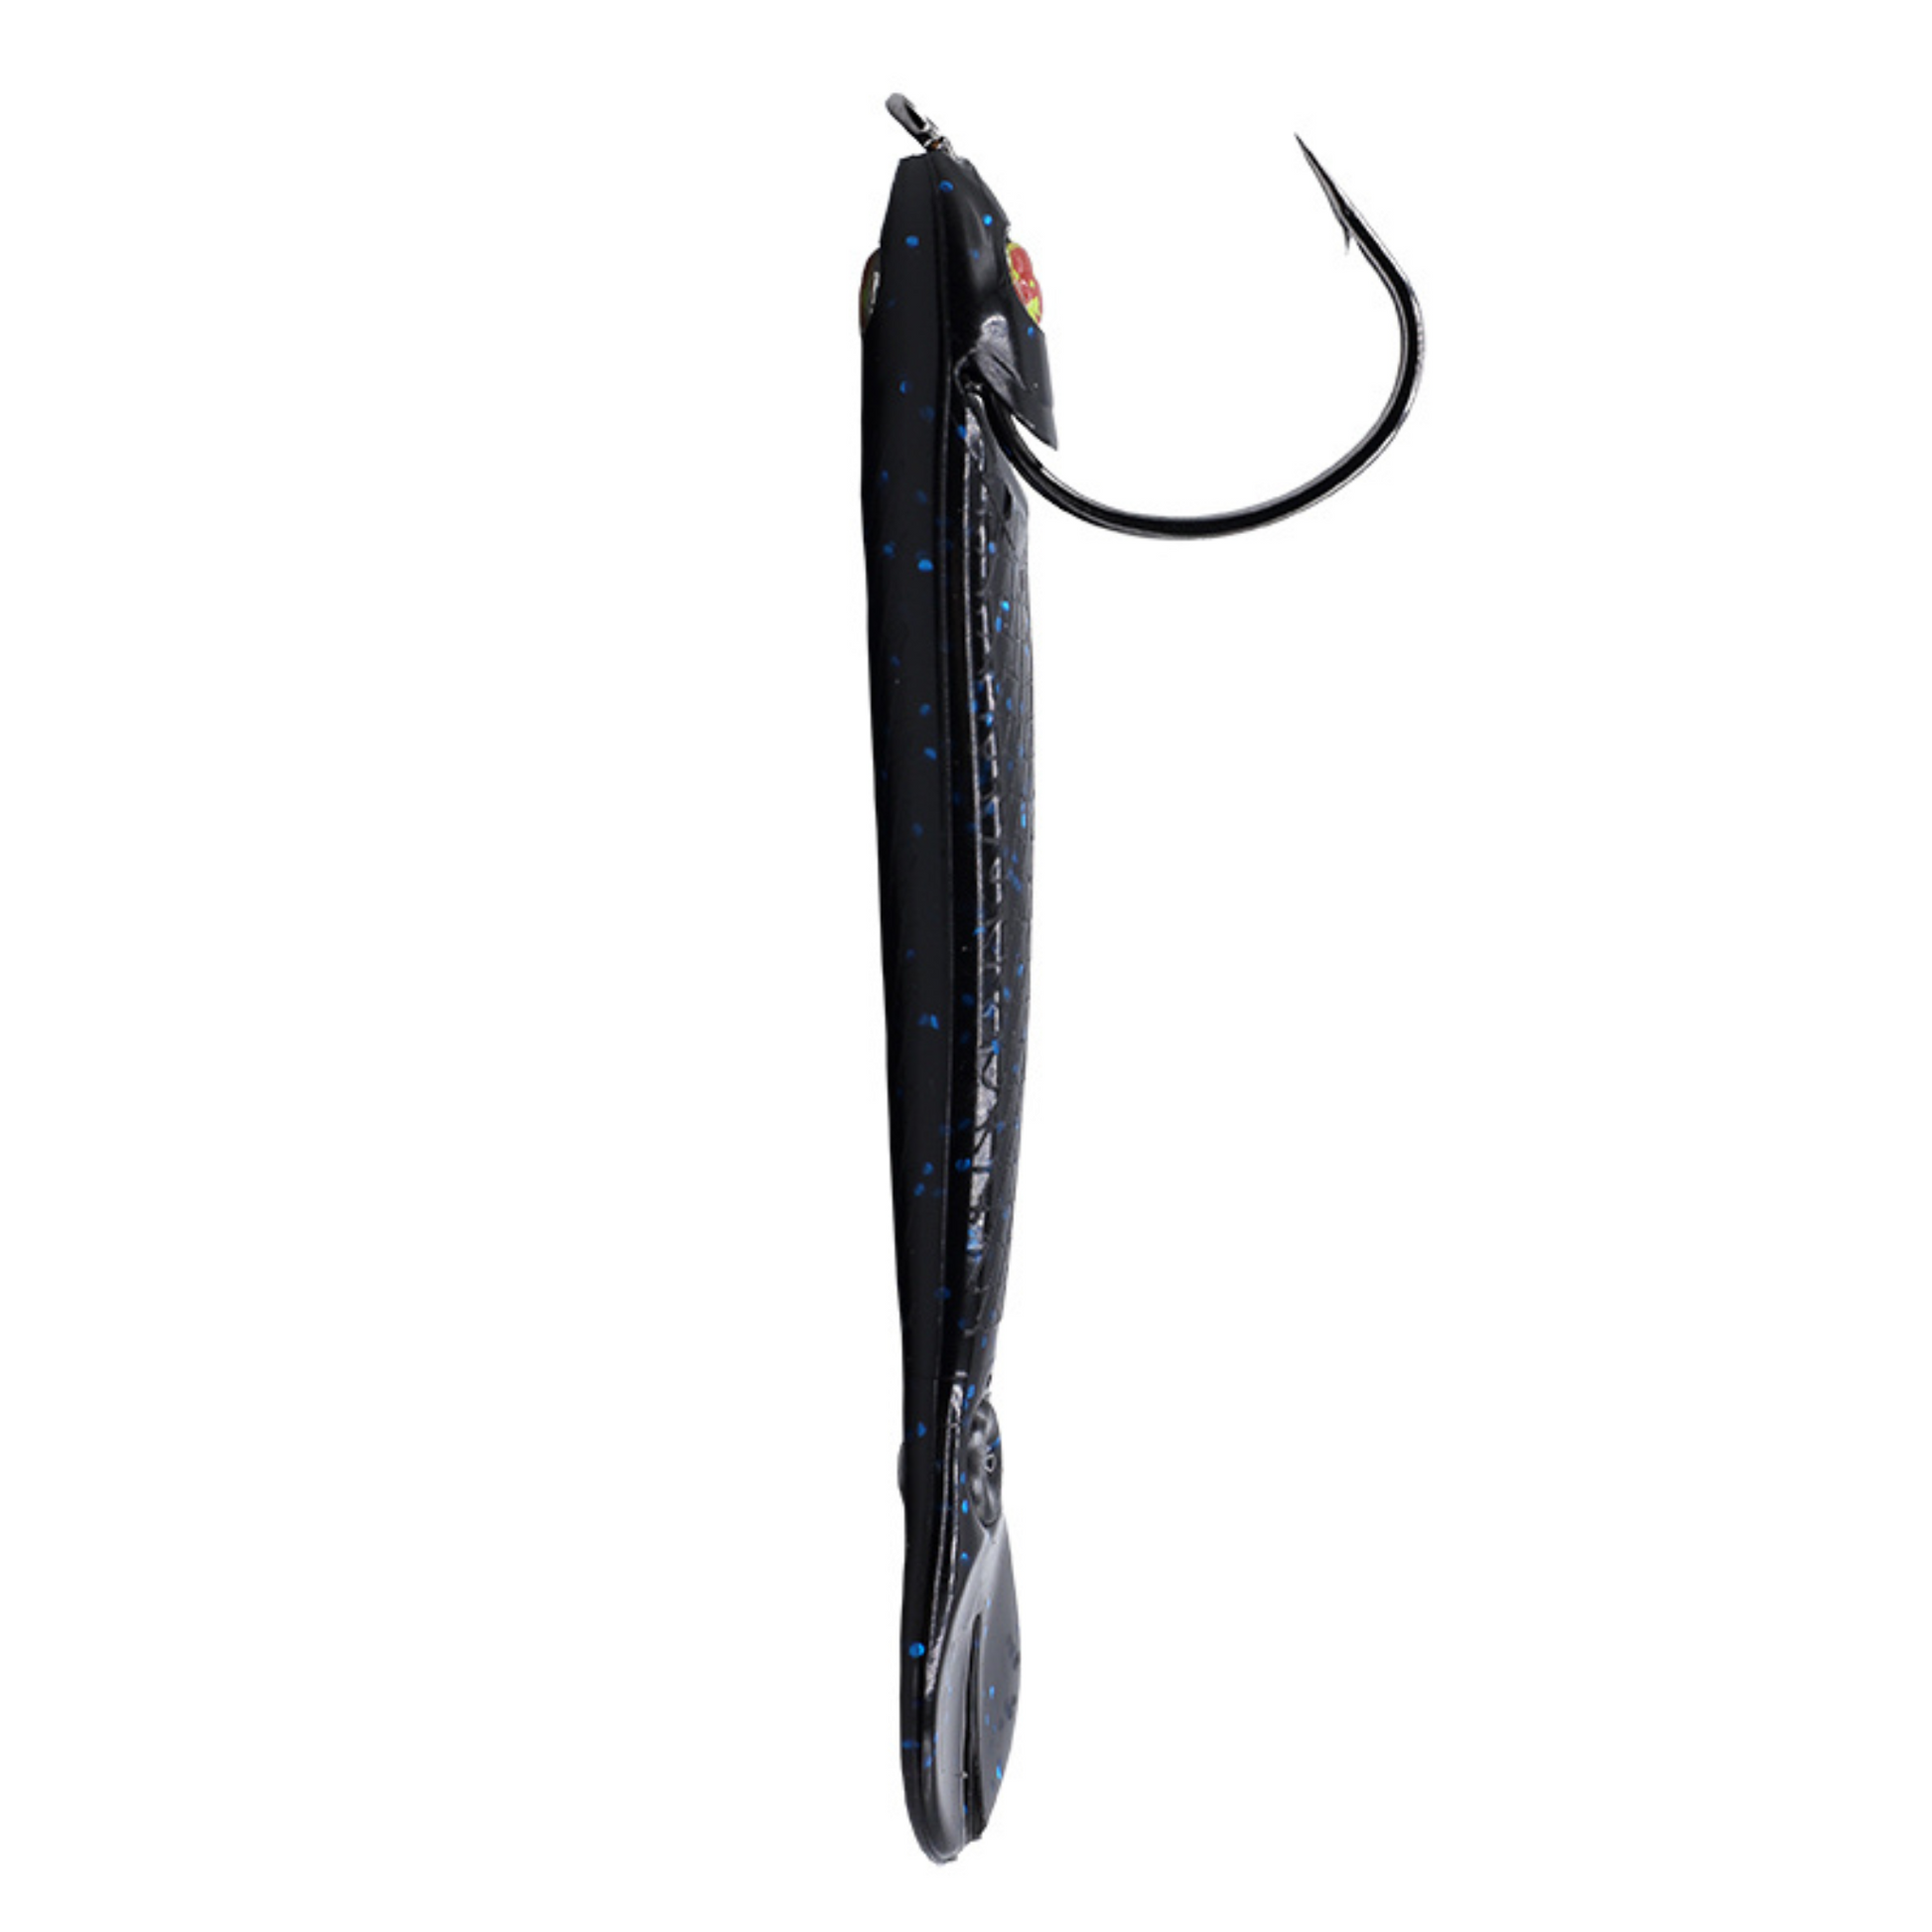 3.25 5pc. Recoil Baits - Black w/ Blue Flake – Lawless Lures